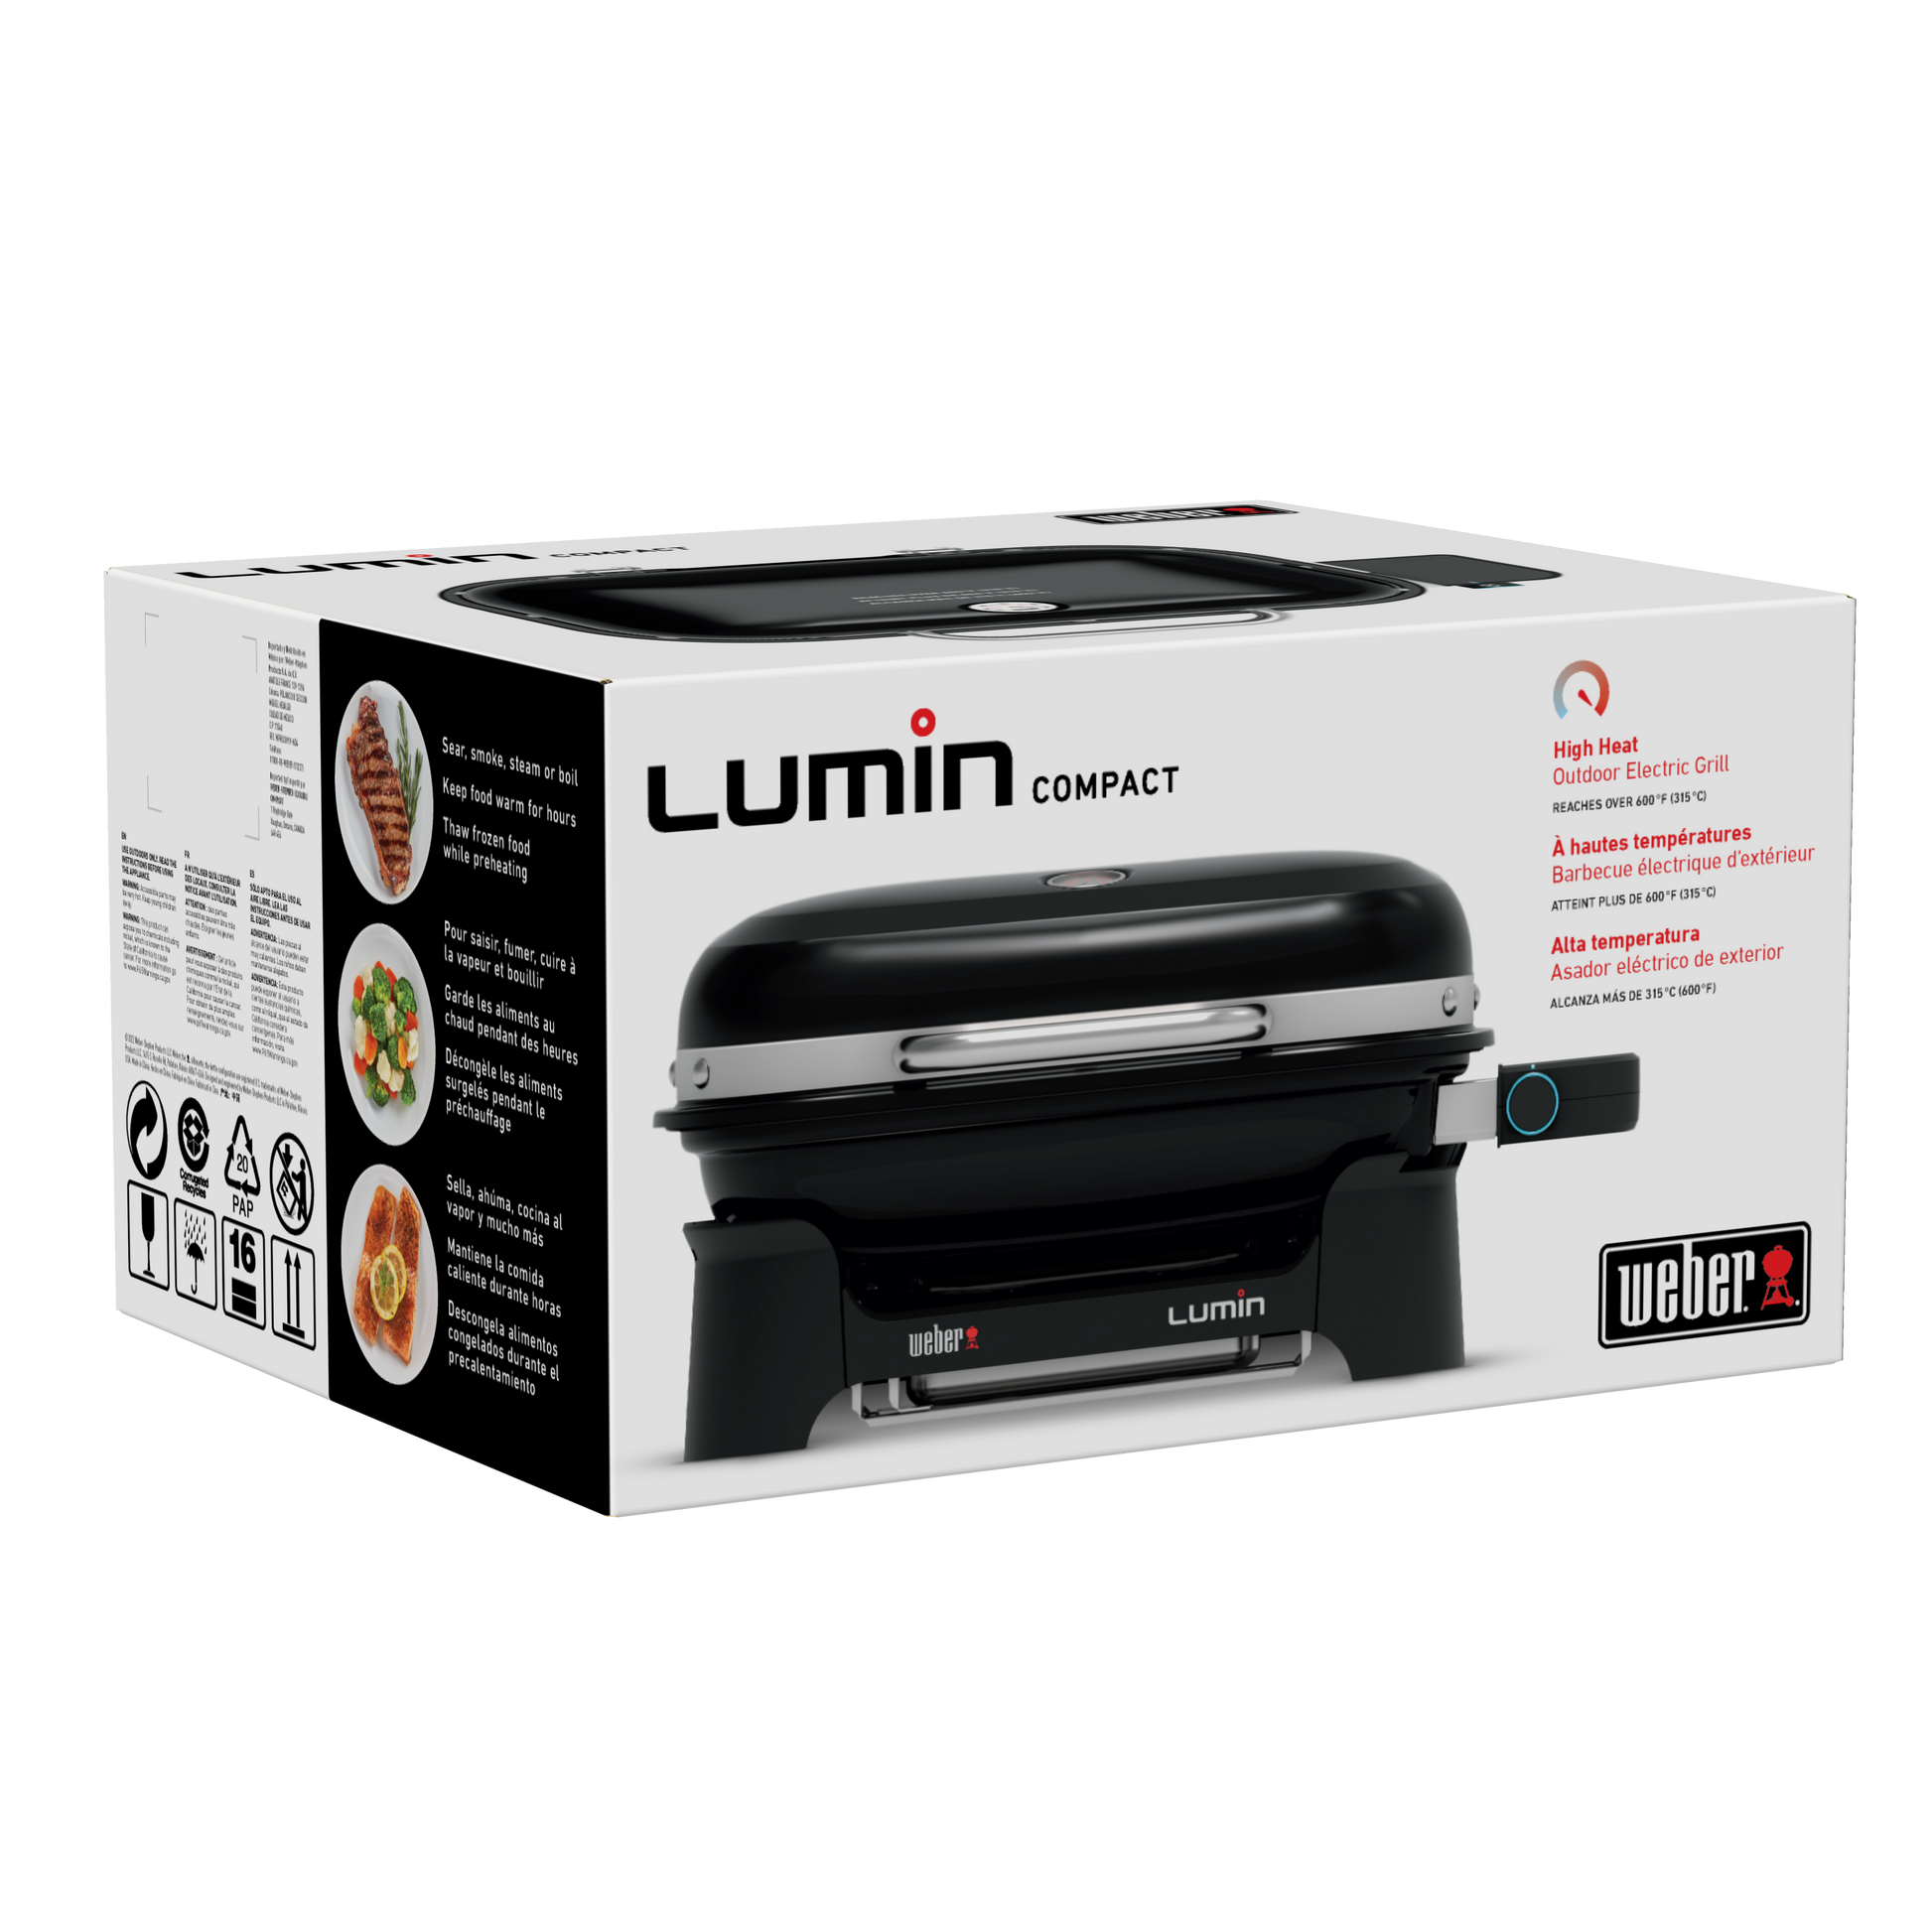 Weber Lumin Compact Electric Grill - Black Weber Chilliwack BBQ Supply